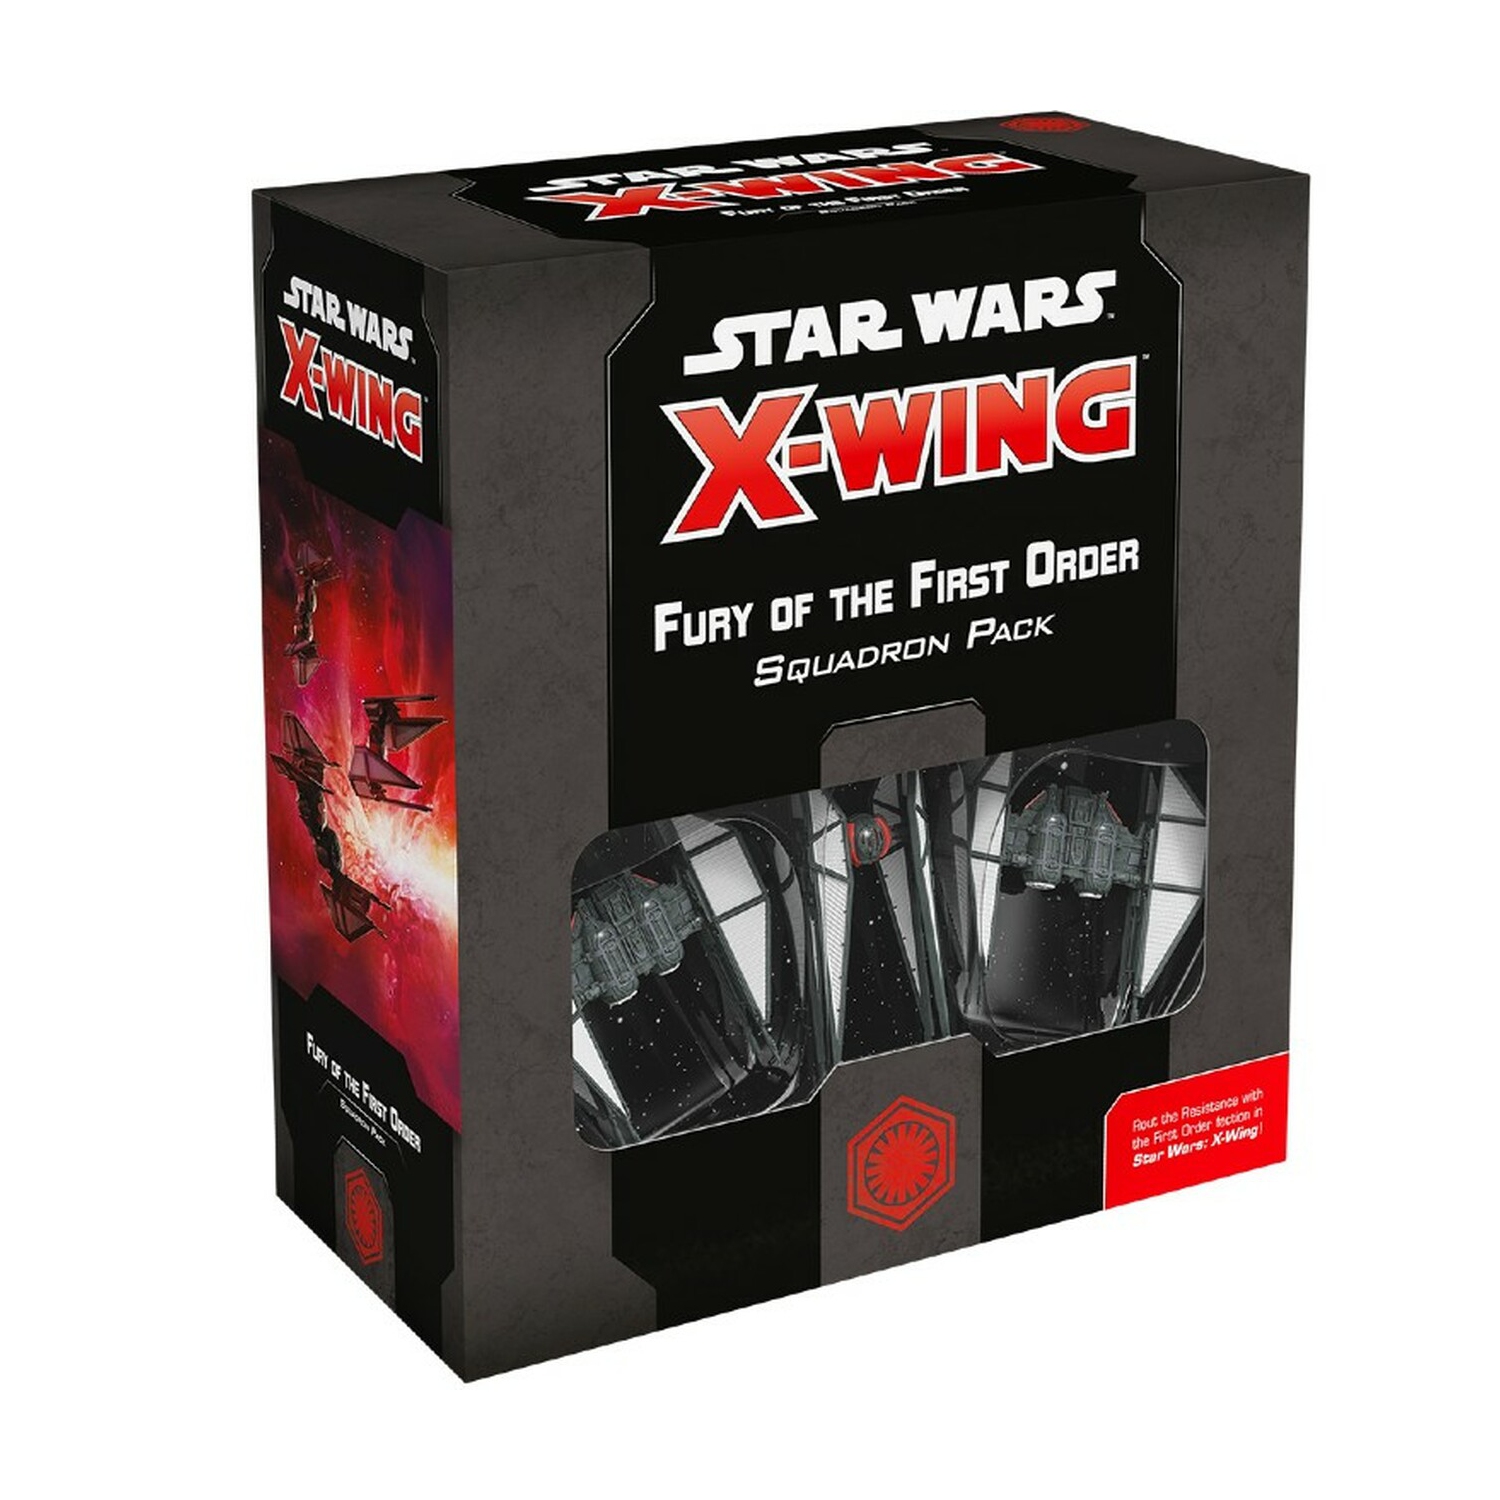 Fantasy Flight Games Star Wars: X-Wing Second Edition - Fury of the First Order Squadron Pack 2 players, ages 14+, 30-45 minutes